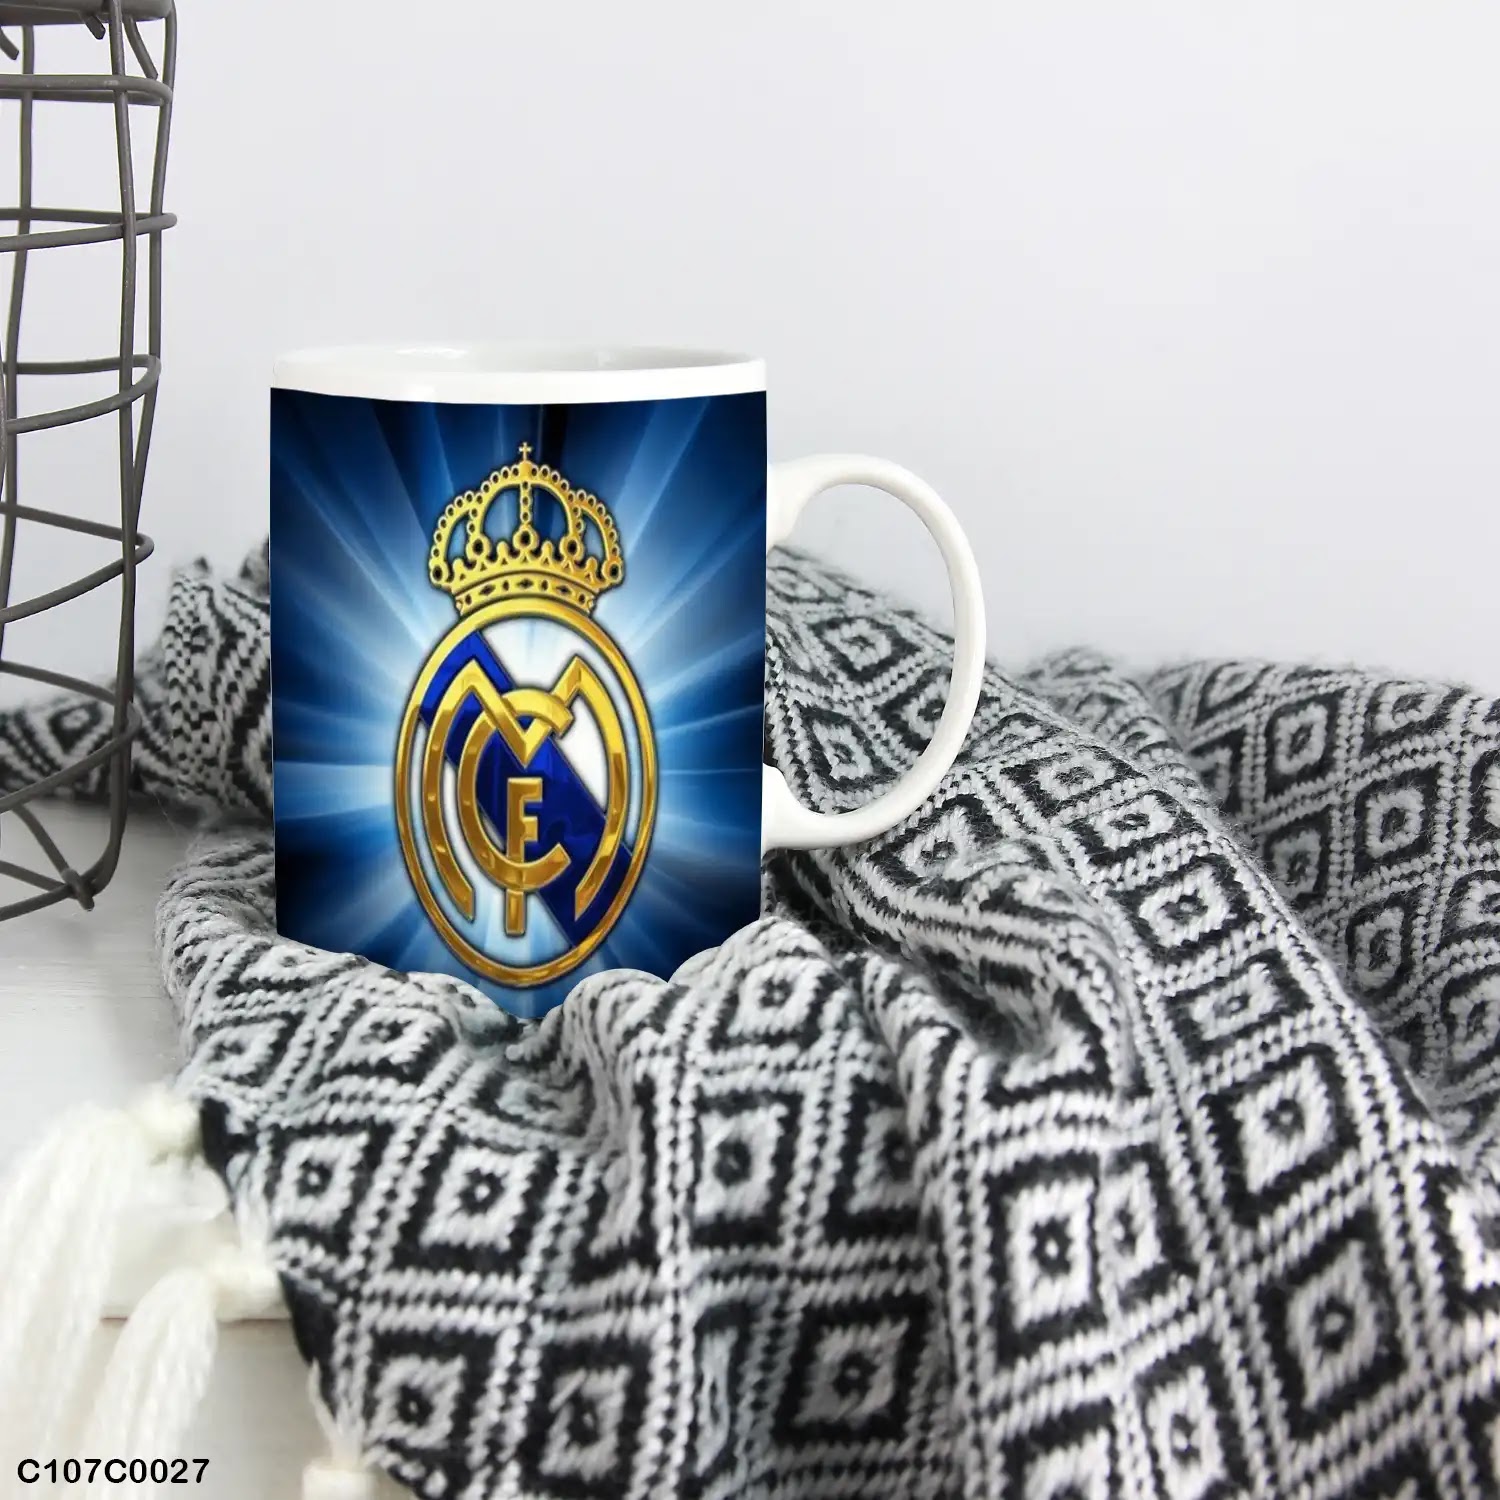 A mug (cup) printed with an image of a Real Madrid logo